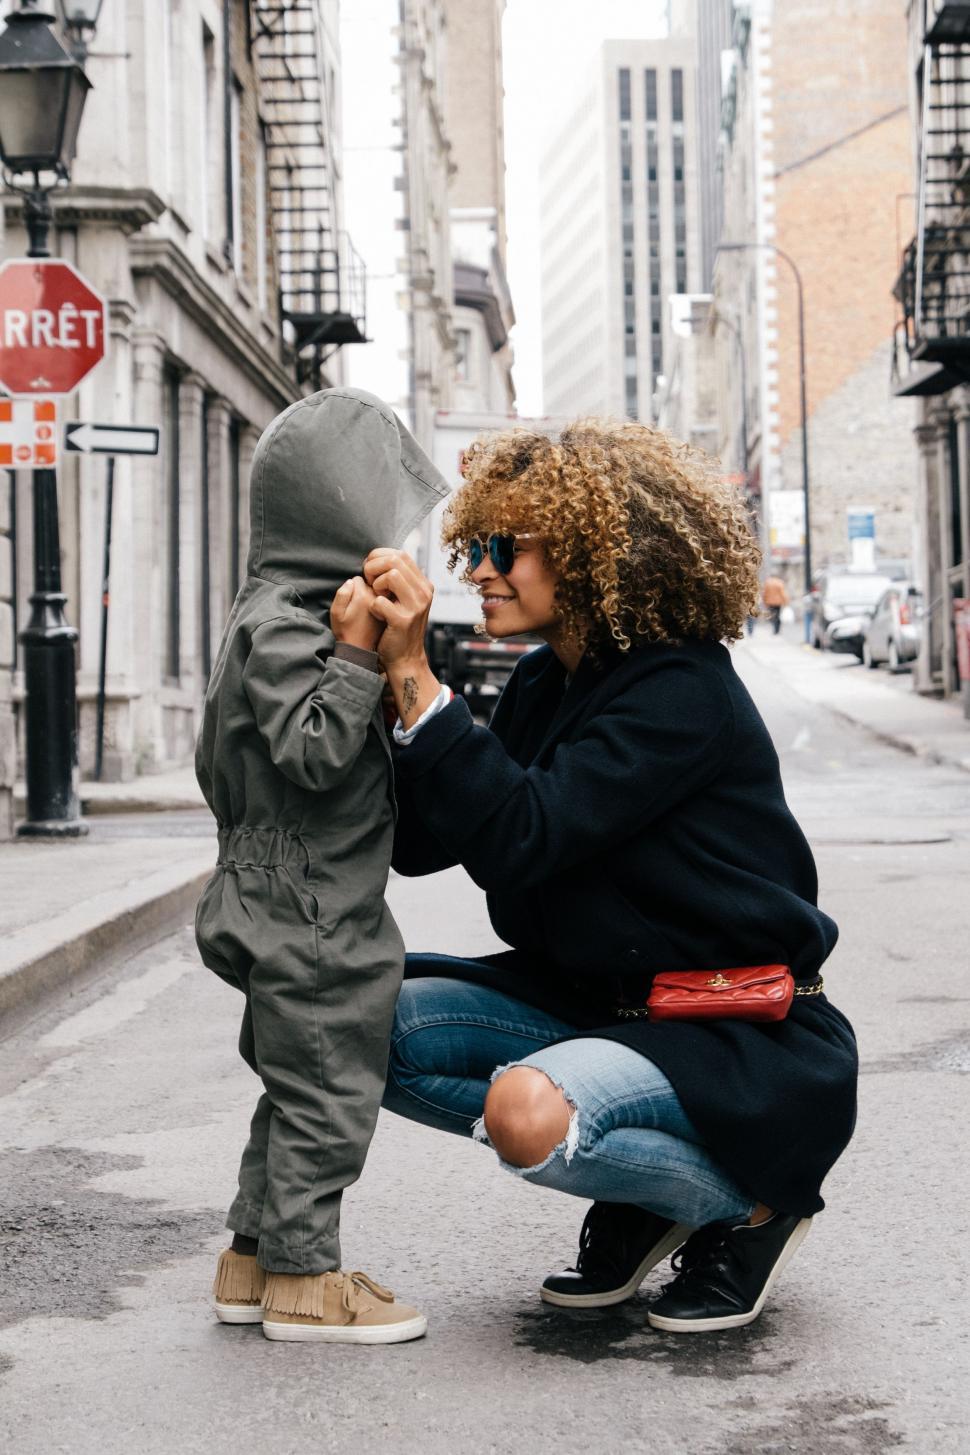 Free Image of Woman Kneeling Down Next to Little Boy 